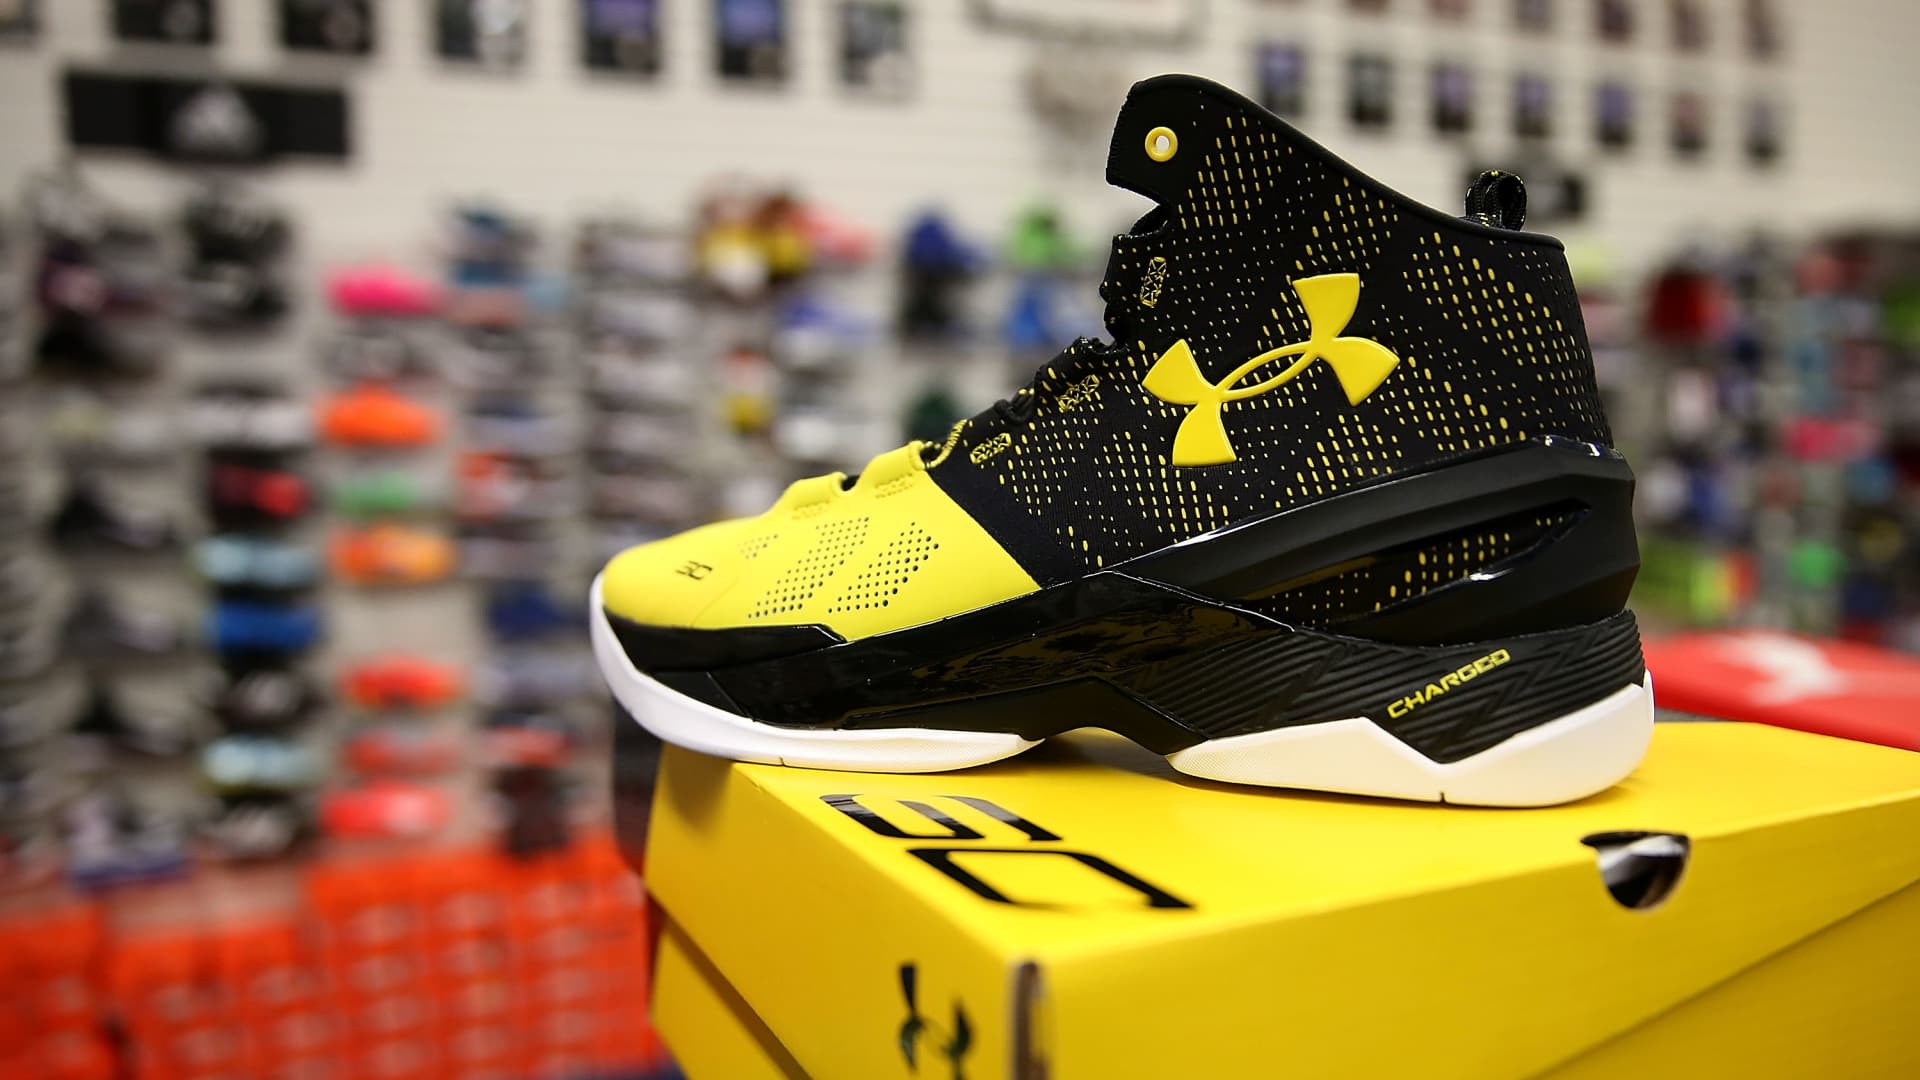 Under Armour pursues plans to break ties some retailers; shares rally